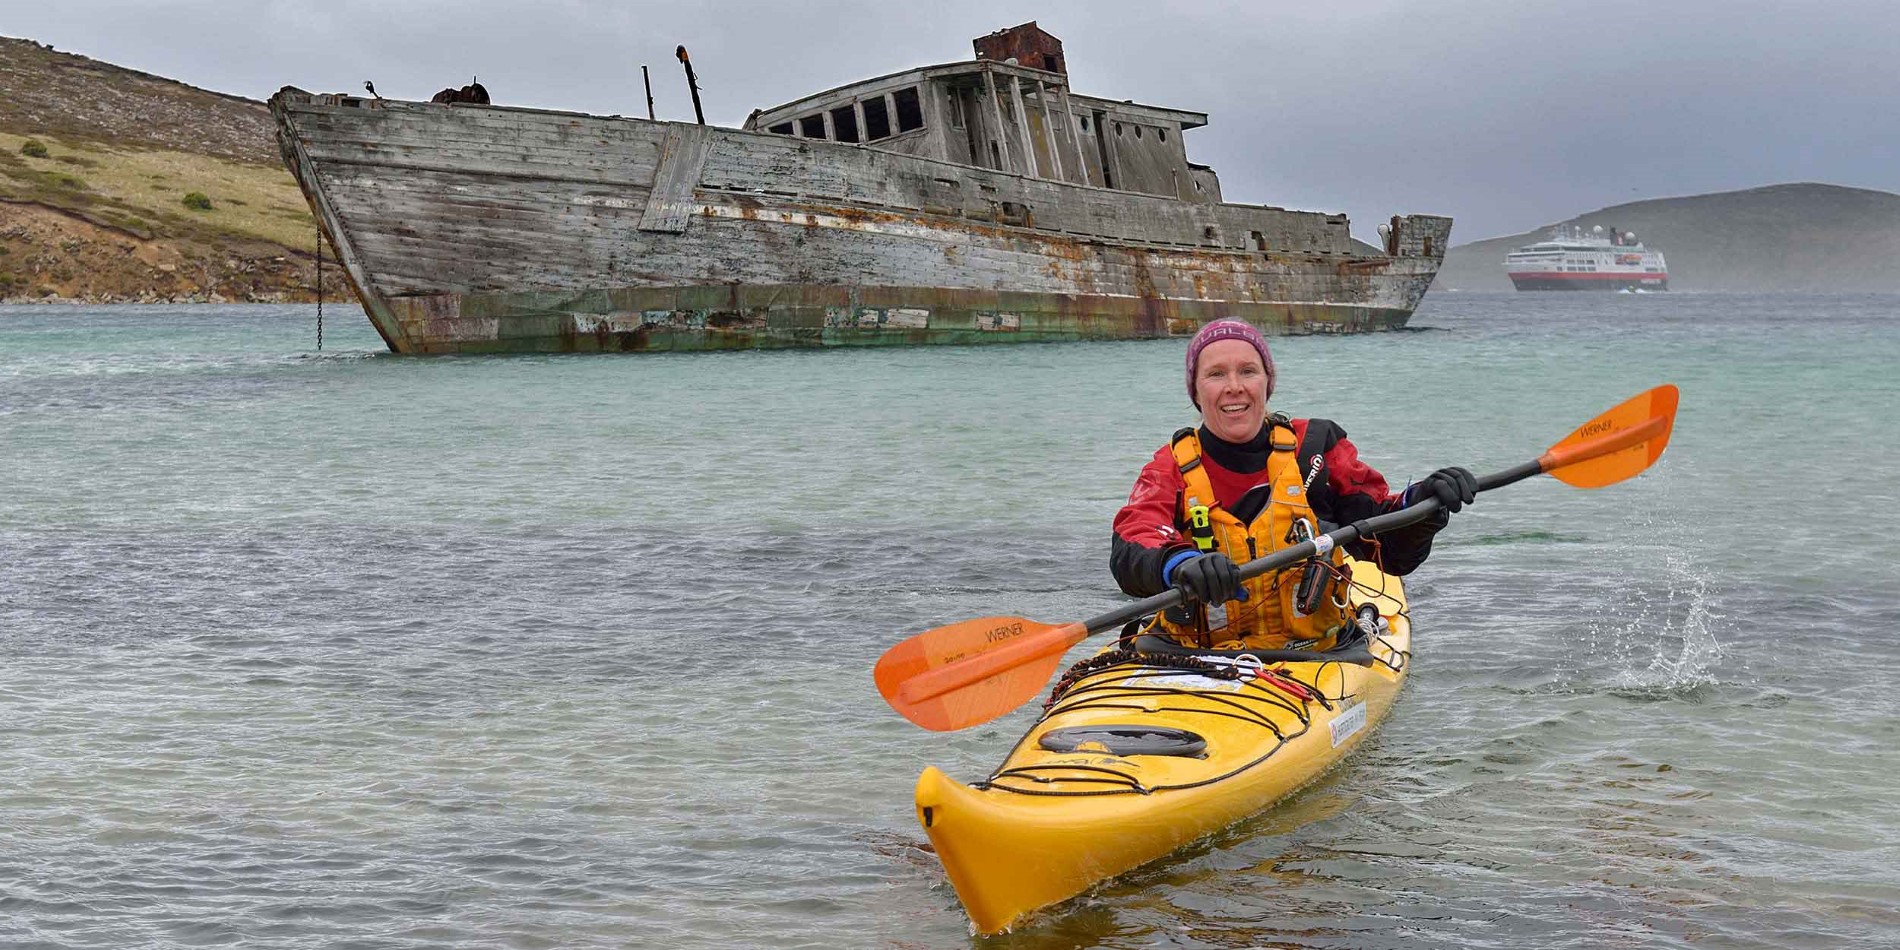 Lady in kayak in front of shipwreck